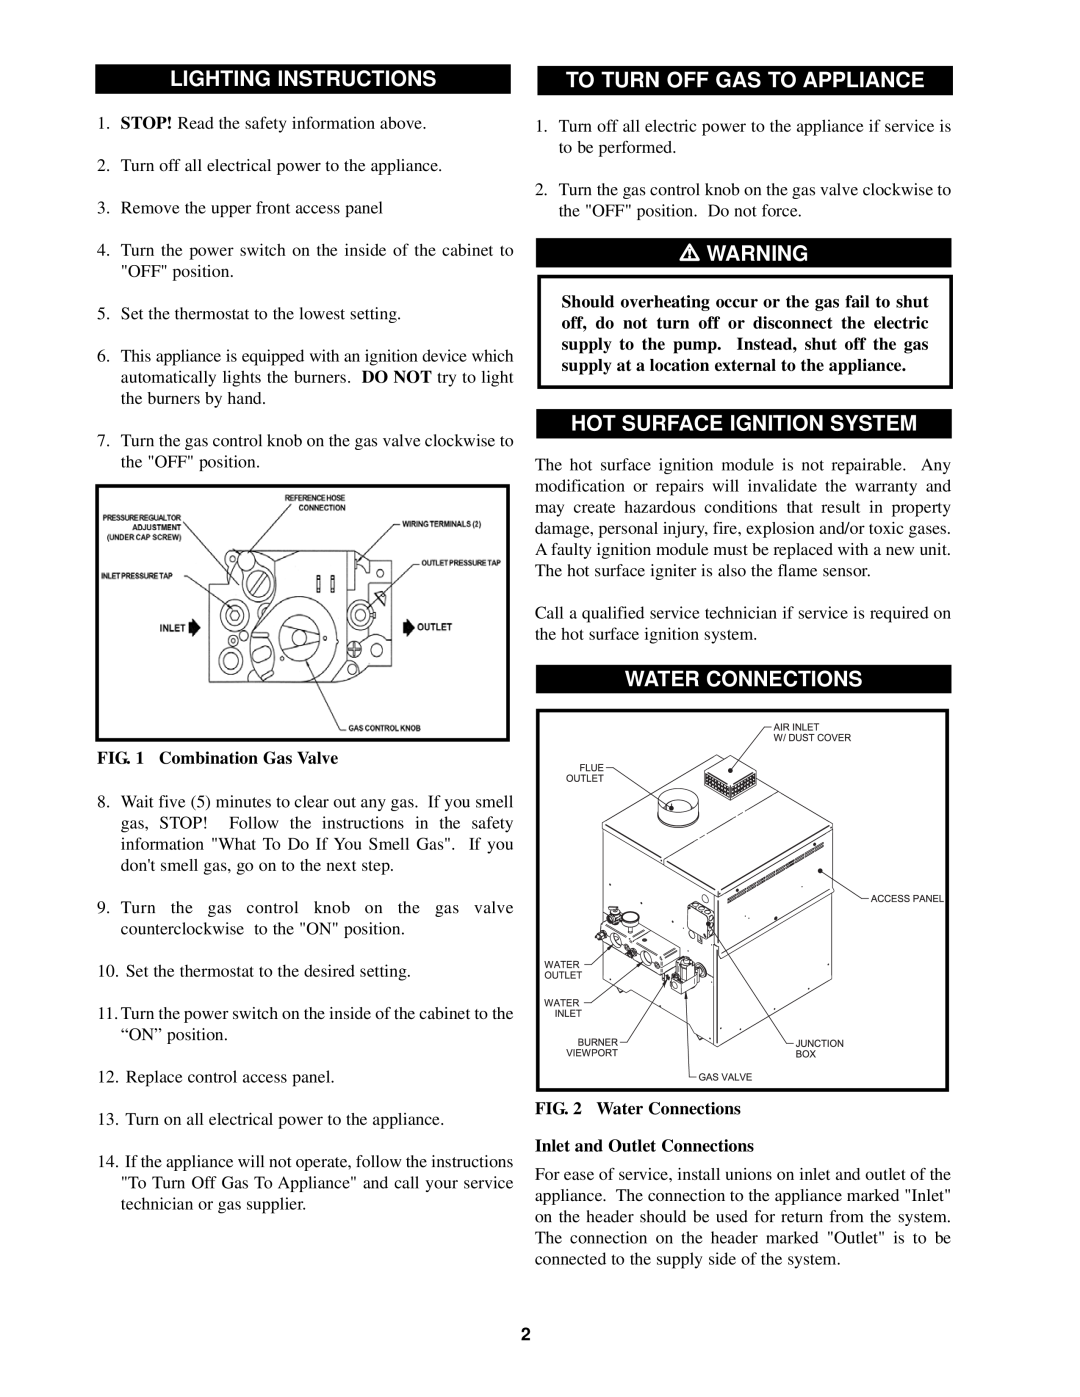 Lochinvar 000 - 300 Lighting Instructions, To Turn Off Gas To Appliance, Hot Surface Ignition System, Water Connections 